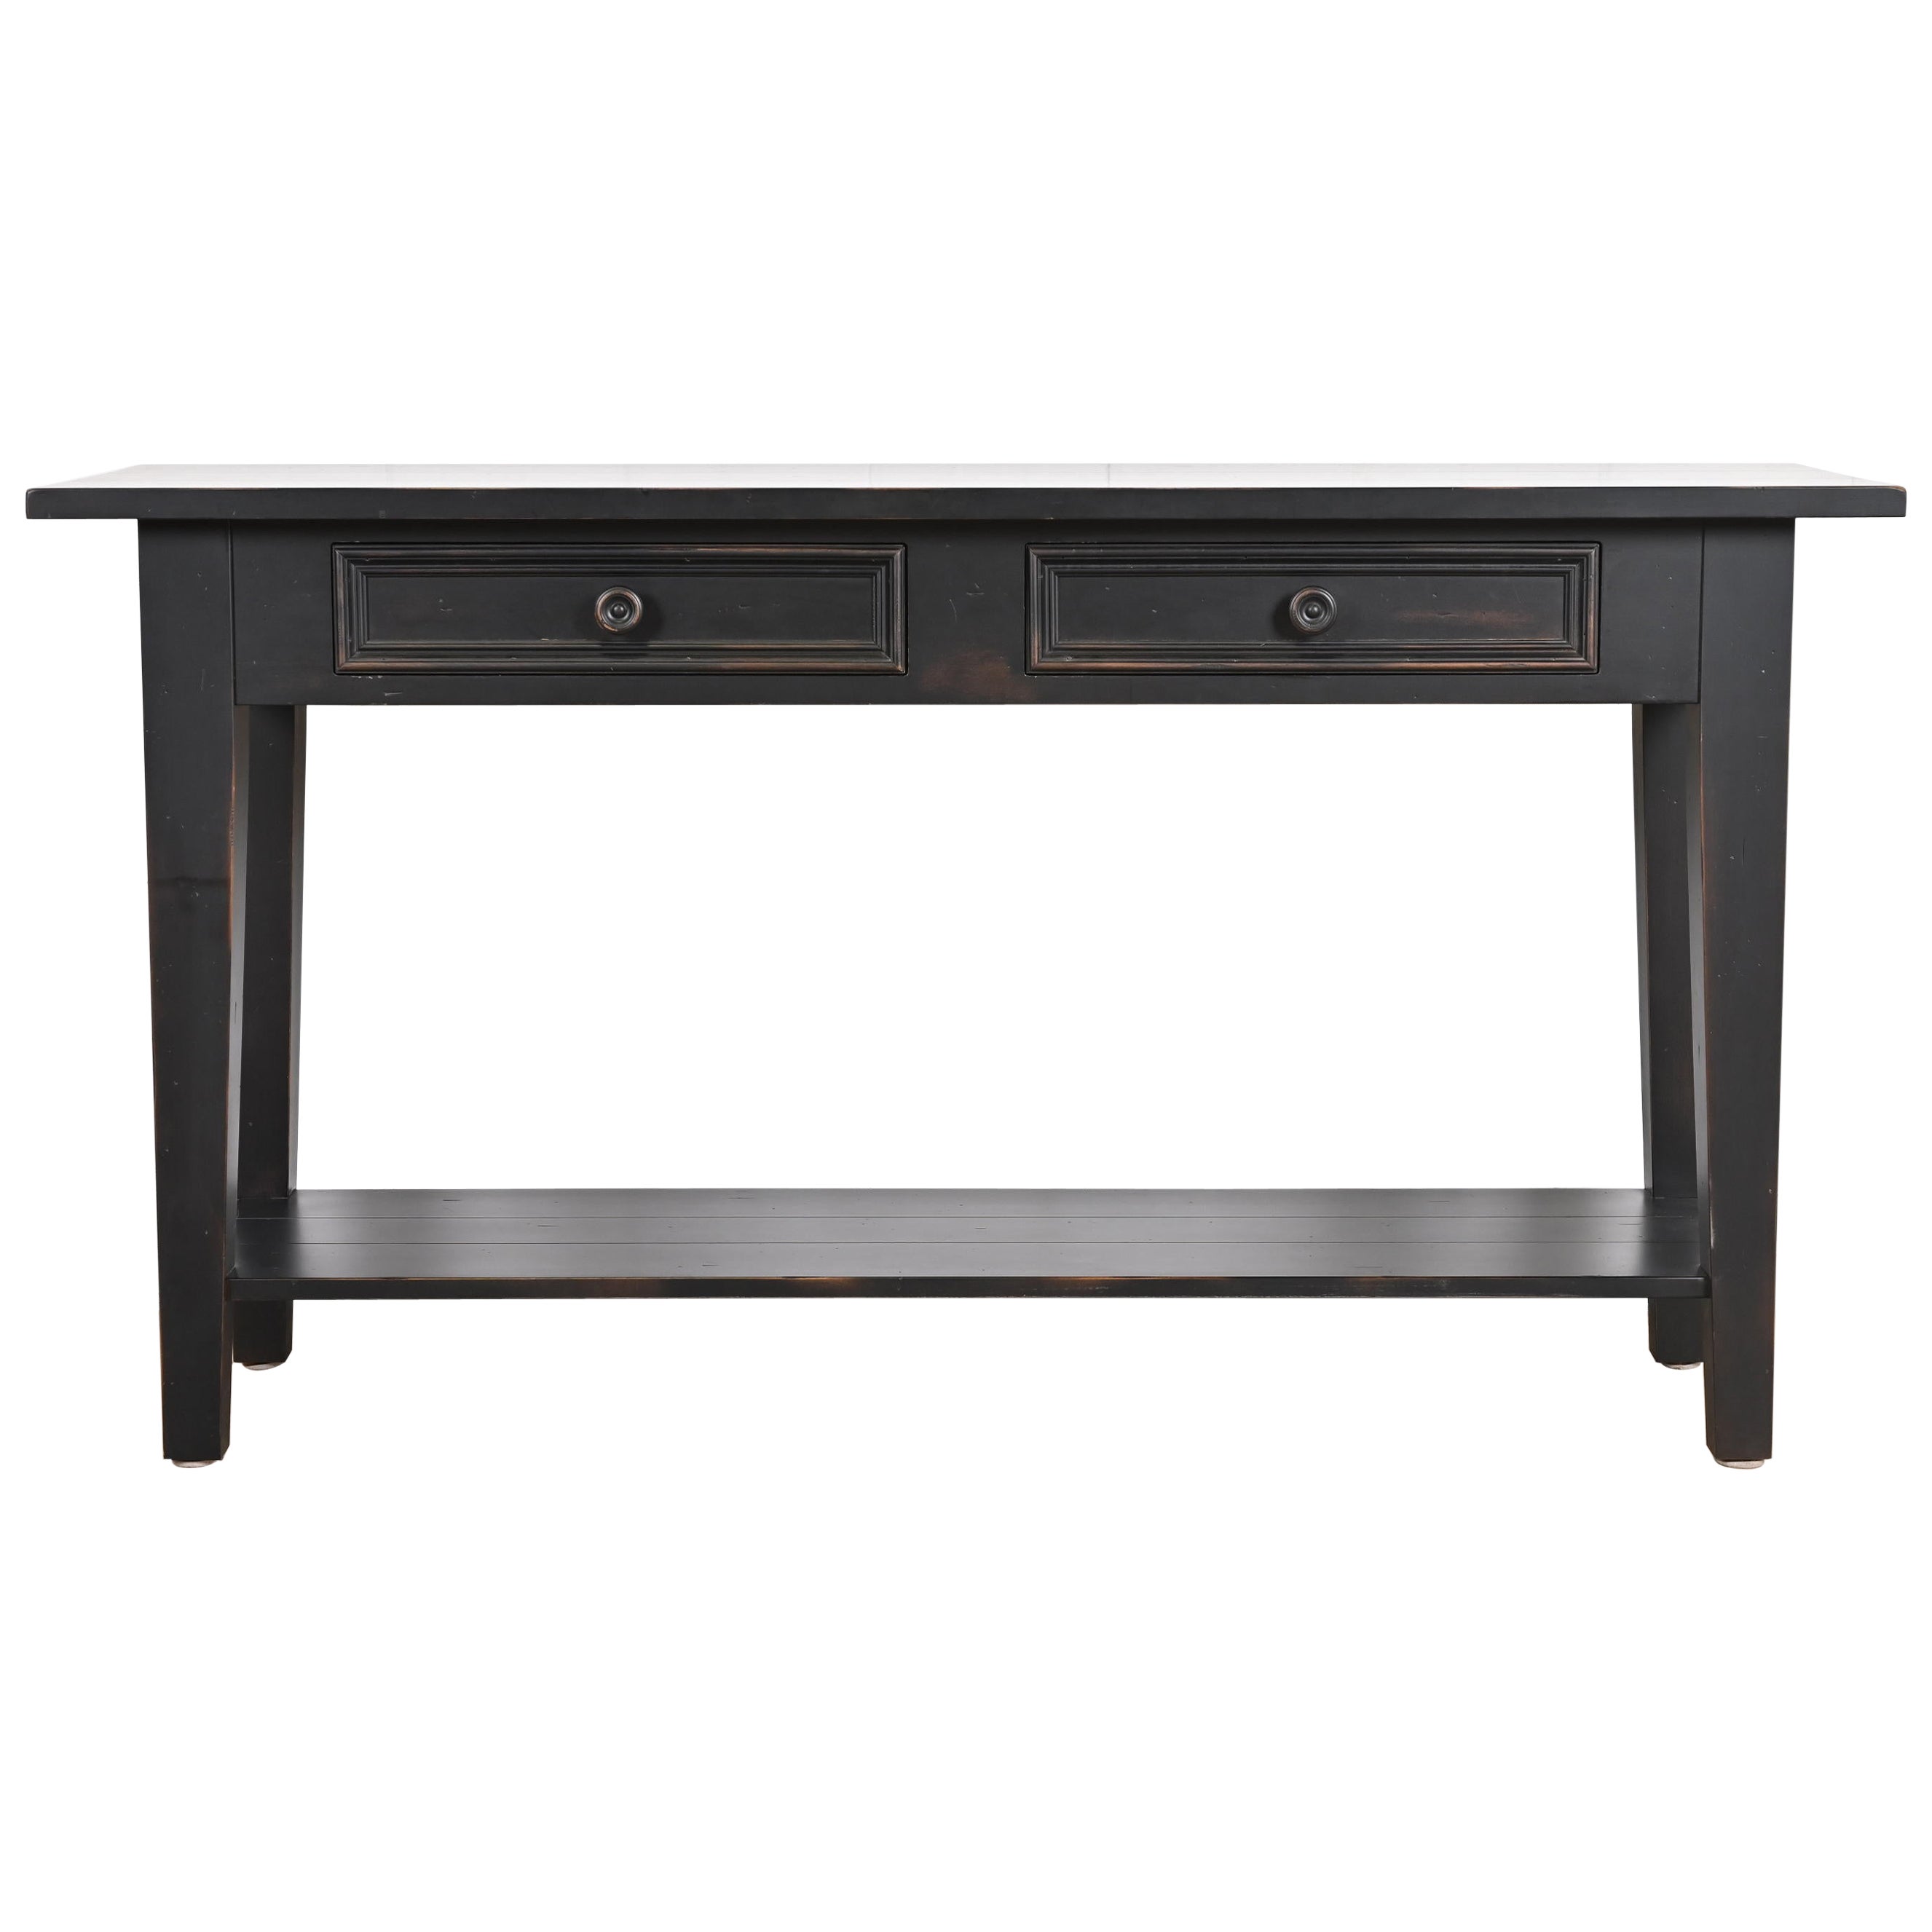 Shaker Style Ebonized Maple Sideboard Buffet Server or Console Table For Sale